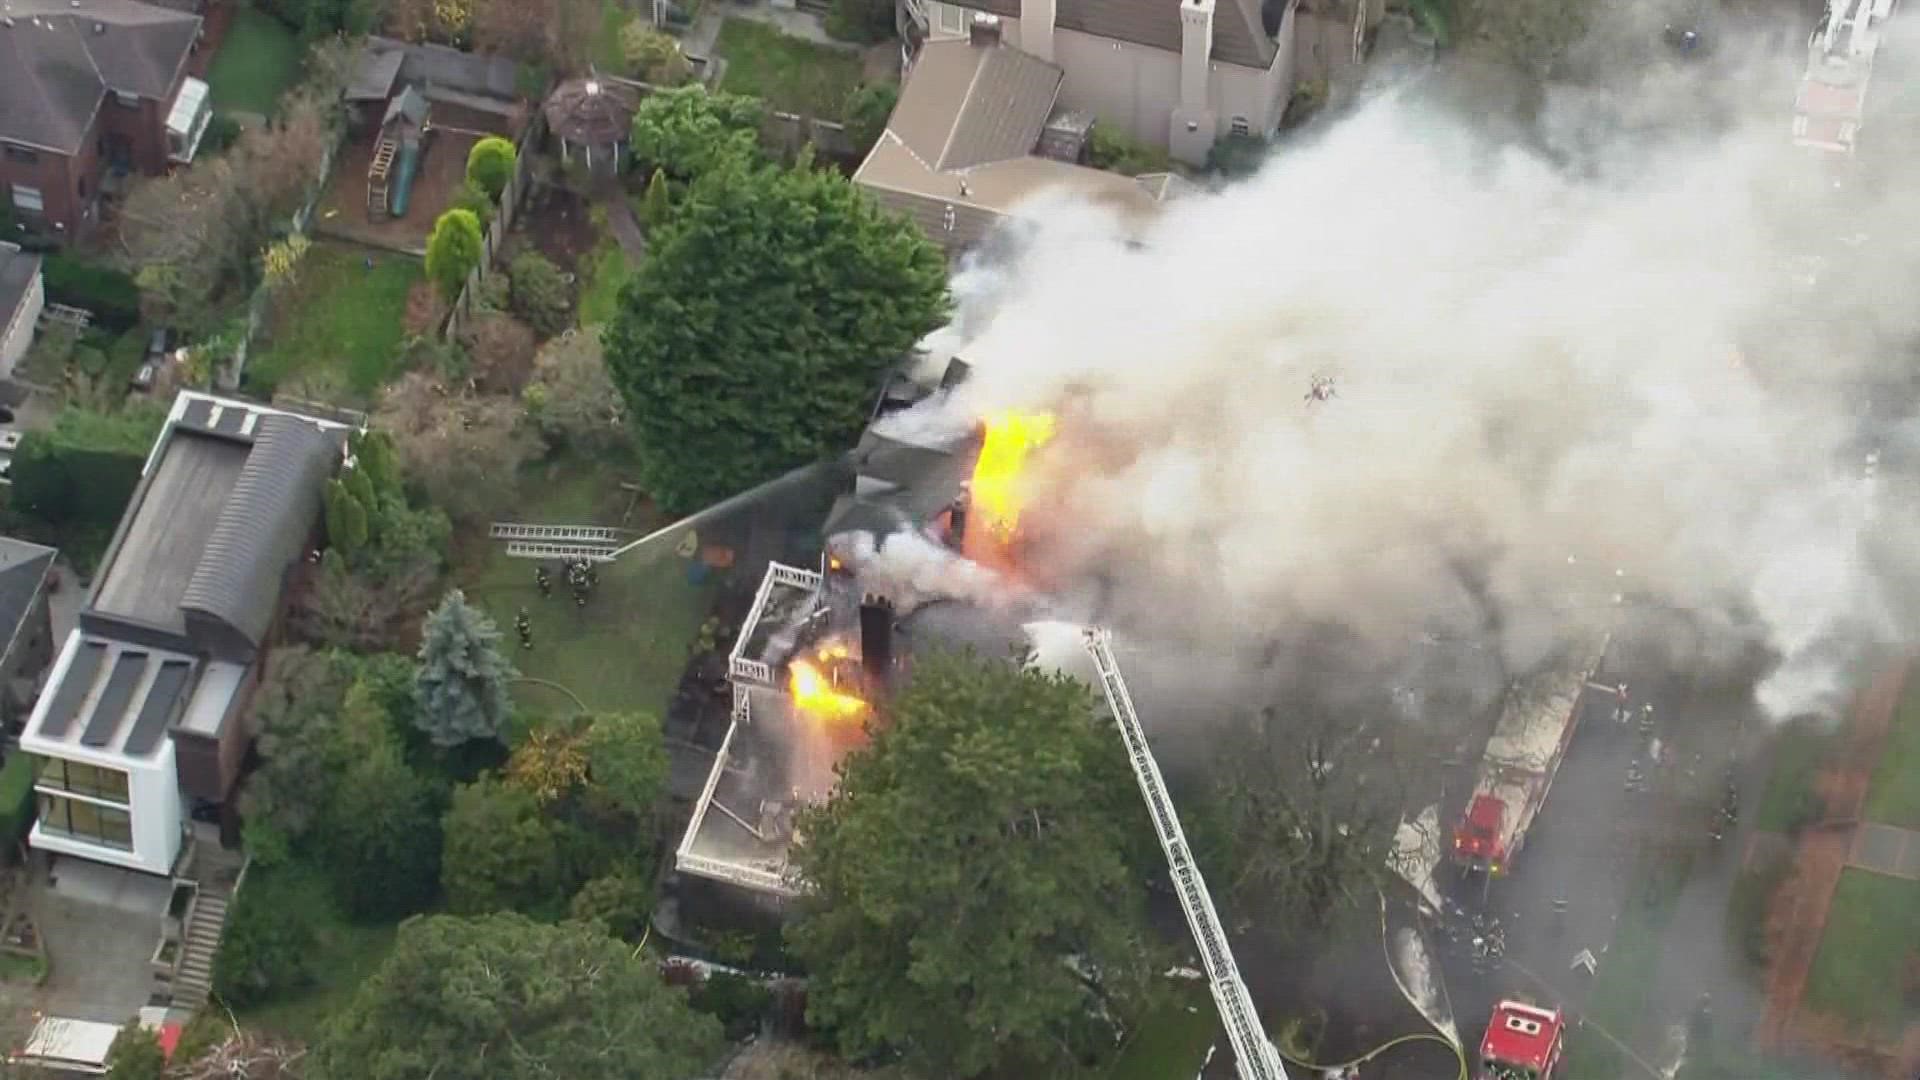 The fire started at a home in the 500 block of West Highland Drive Tuesday afternoon, near Seattle's renowned Kerry Park.